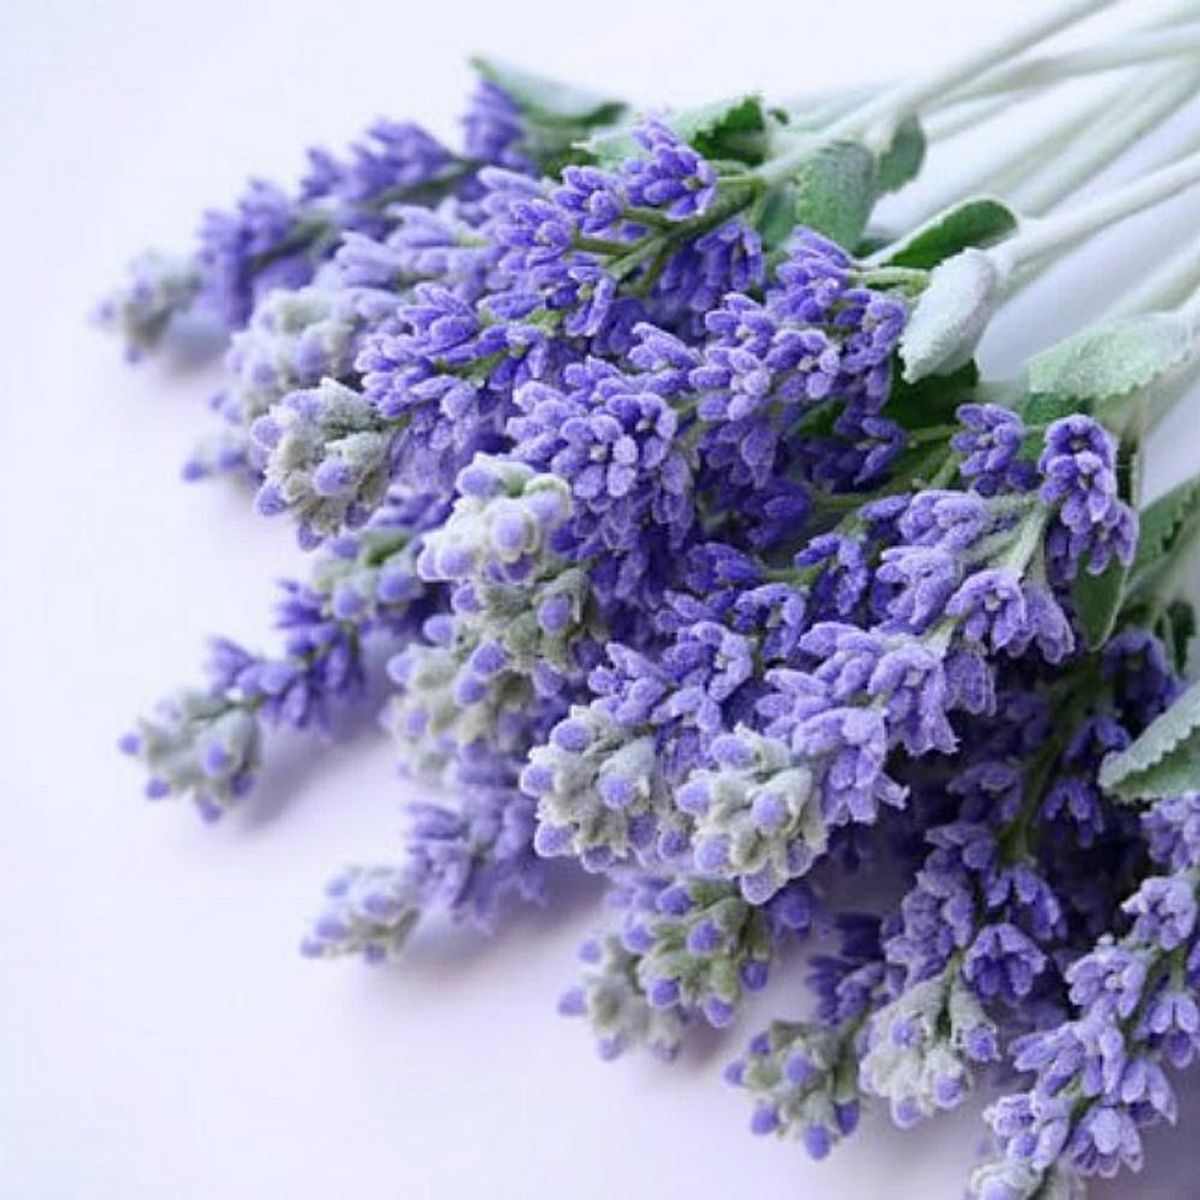 11 Ways Beauty Bloggers Use Lavender in Their Beauty Routines